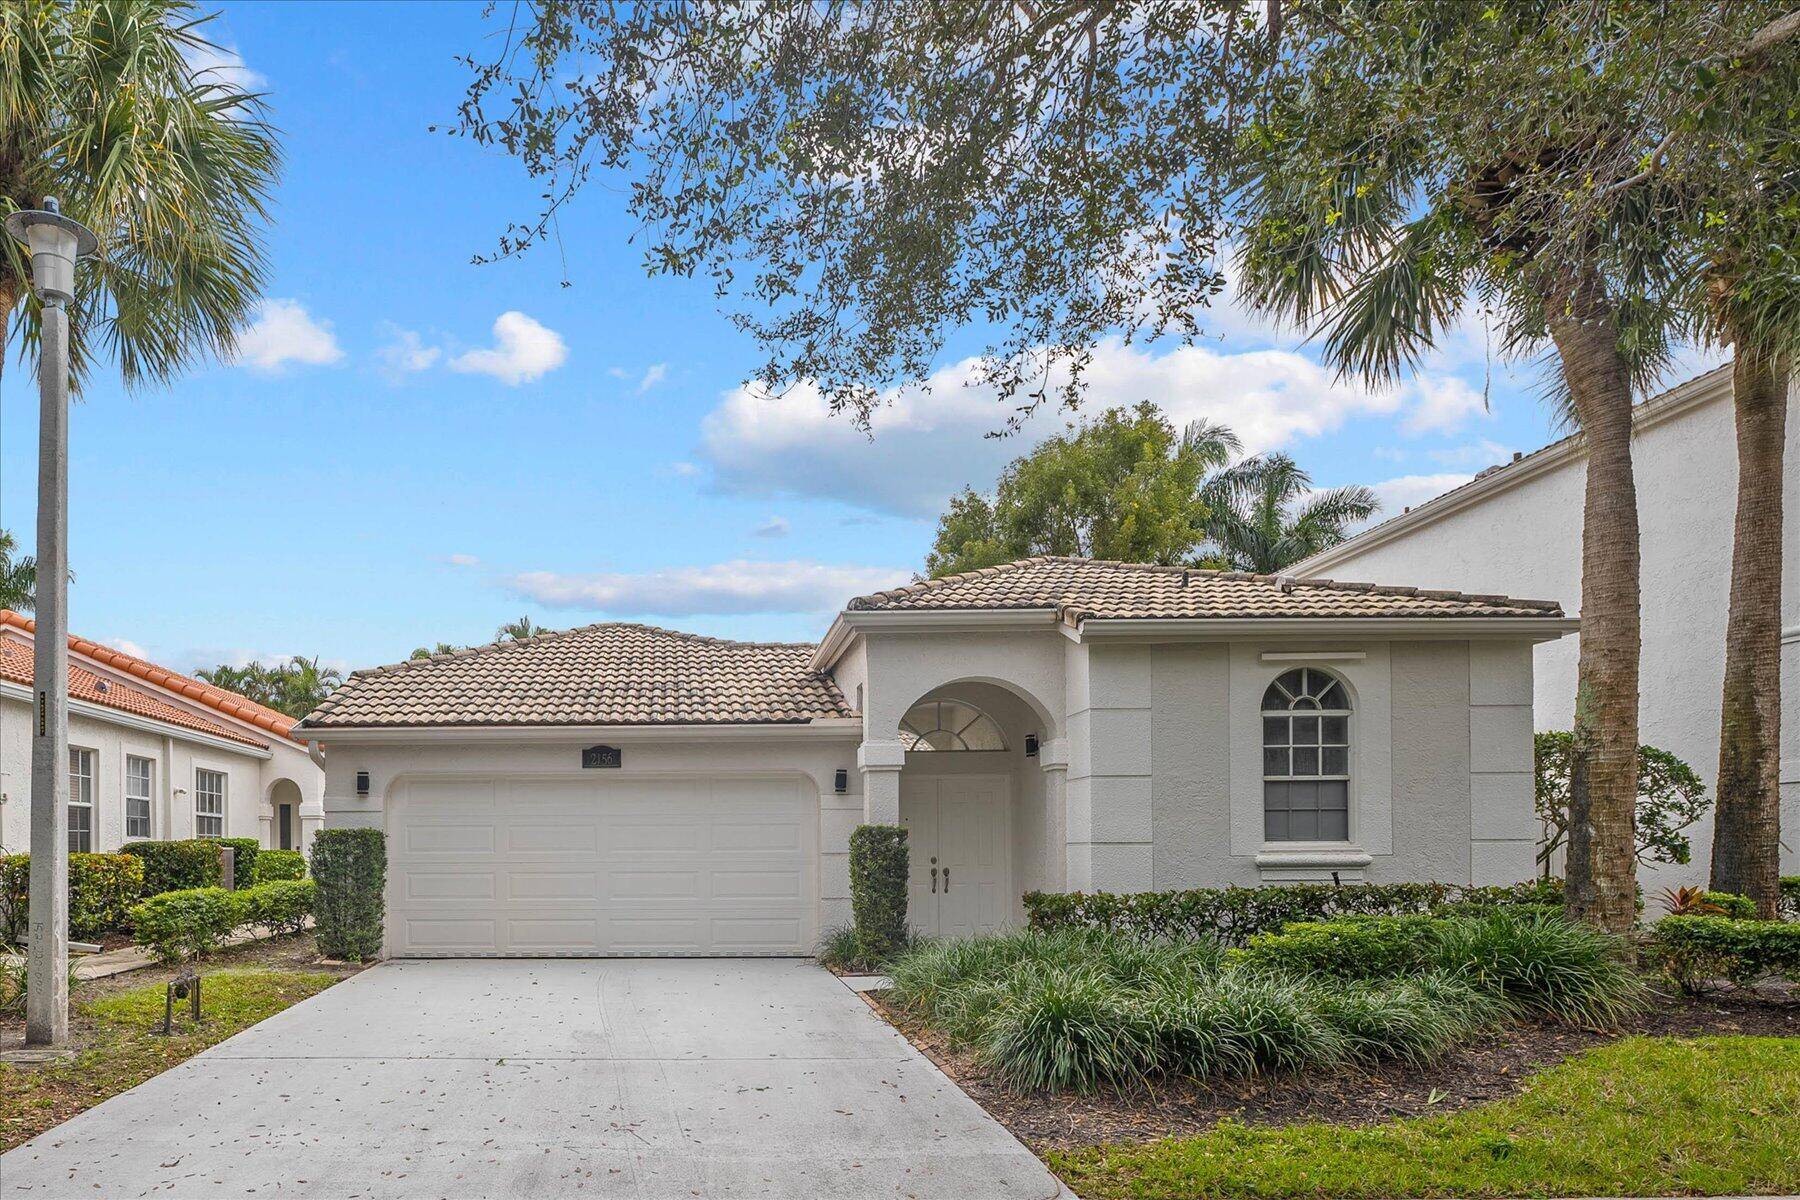 Great single family home in the heart of West Palm Beach.